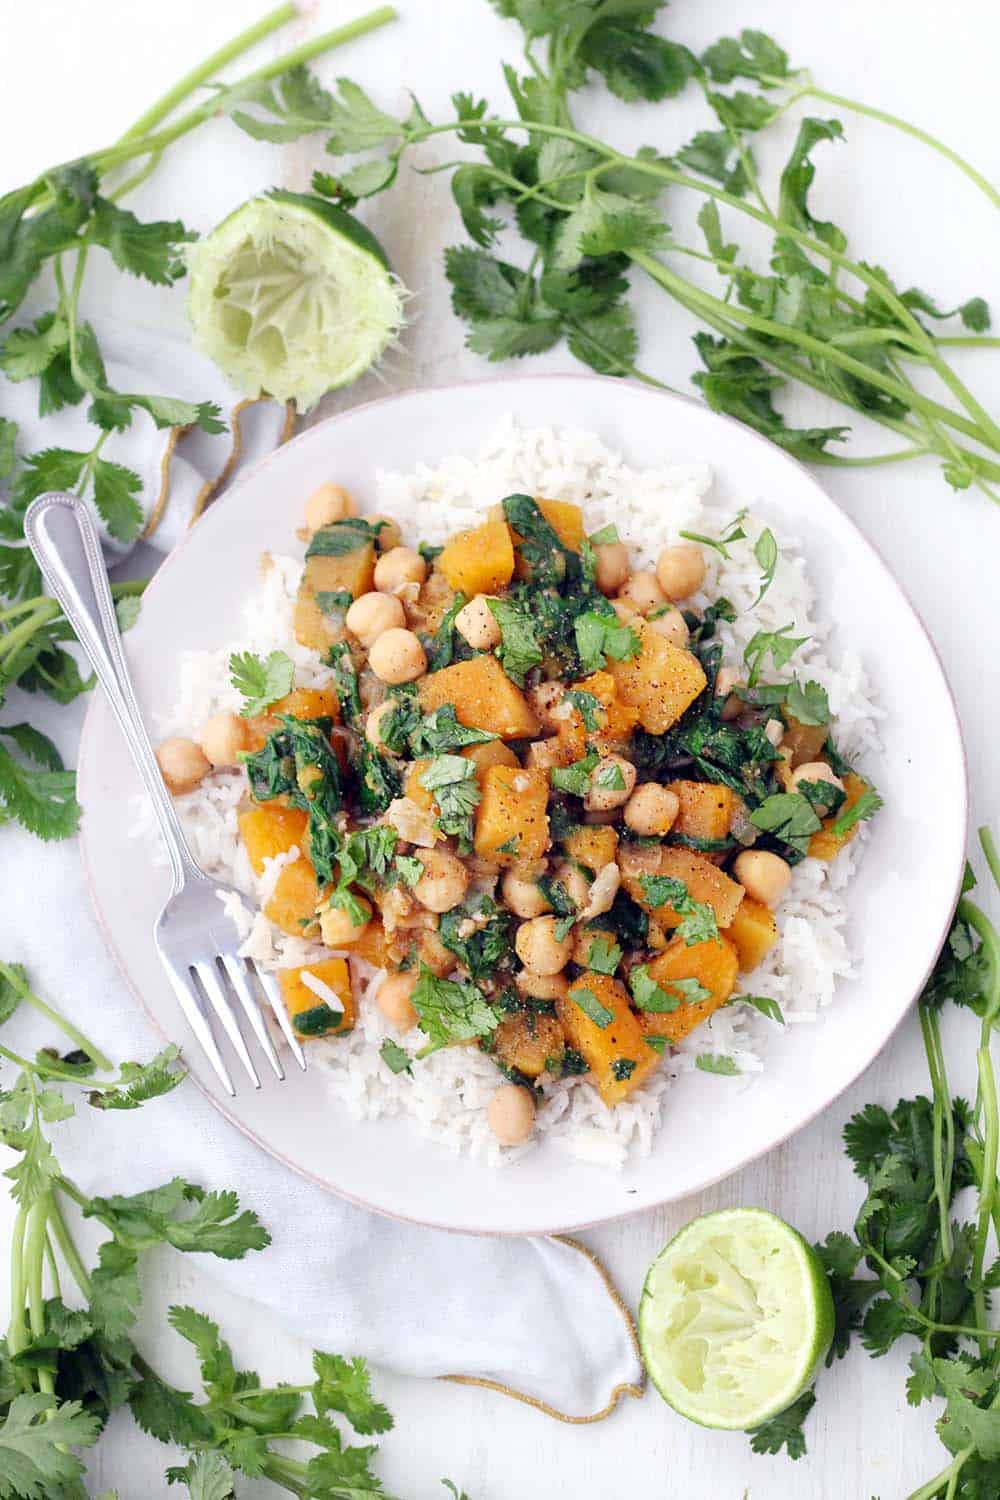 Bird's eye view of Moroccan butternut squash and chickpea stew on a bed of white rise, on a white plate, with a fork perched on the side and herbs scattered around.